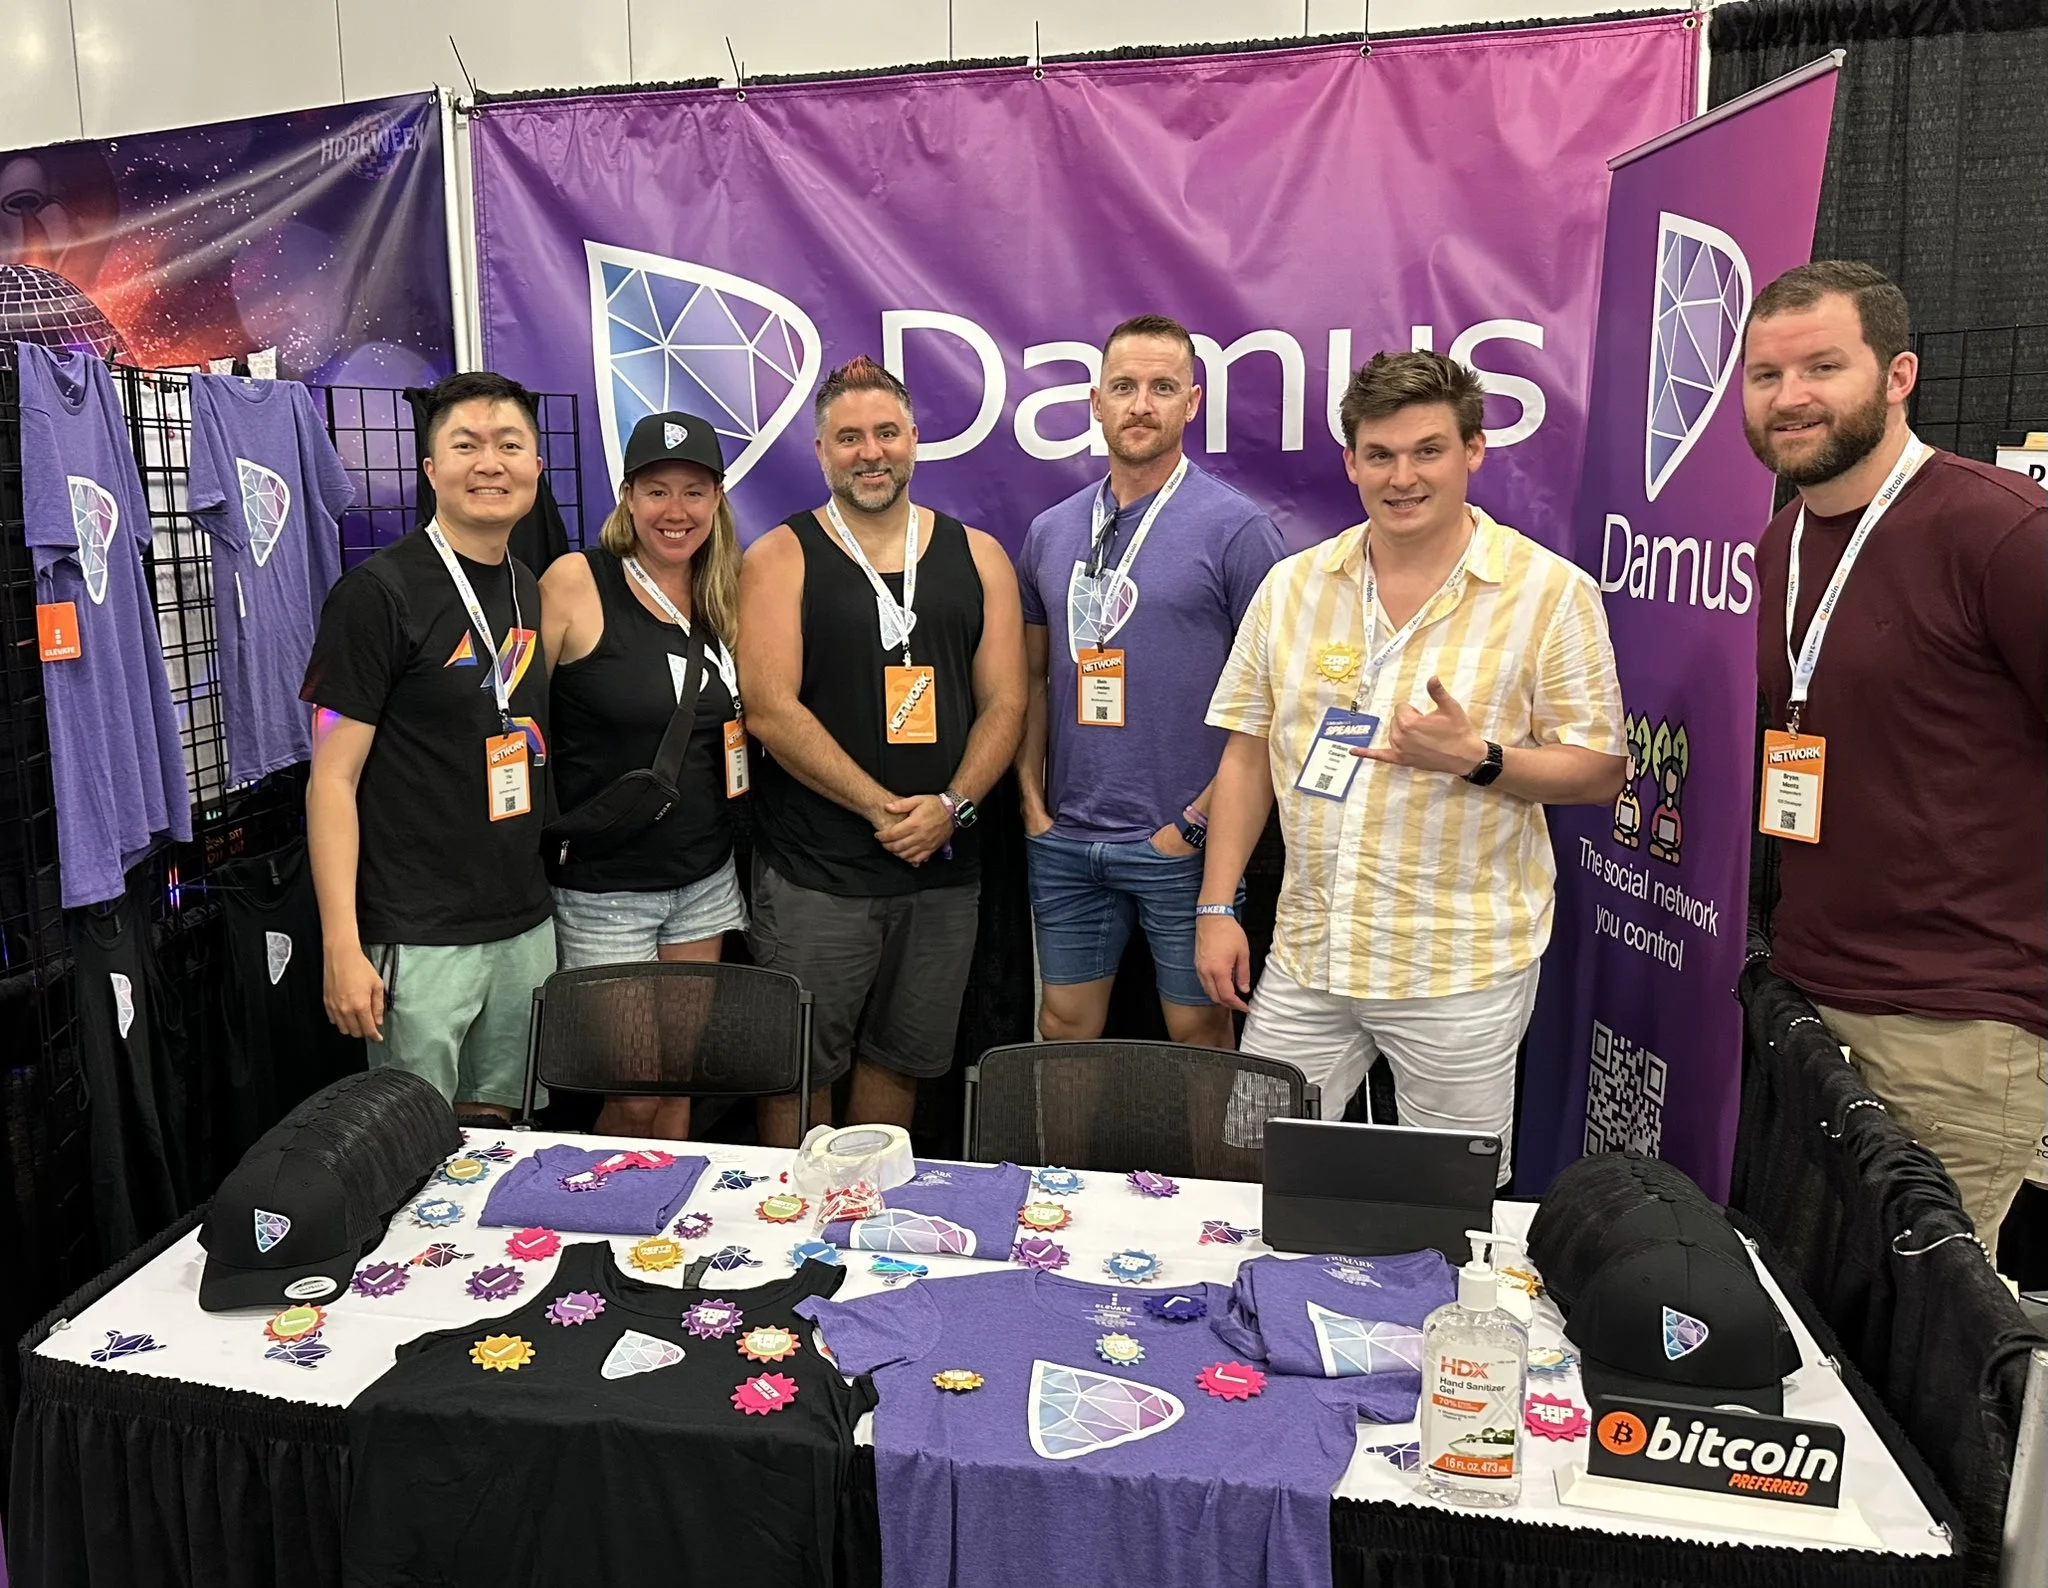 Members of the Damus team and friends at a conference booth